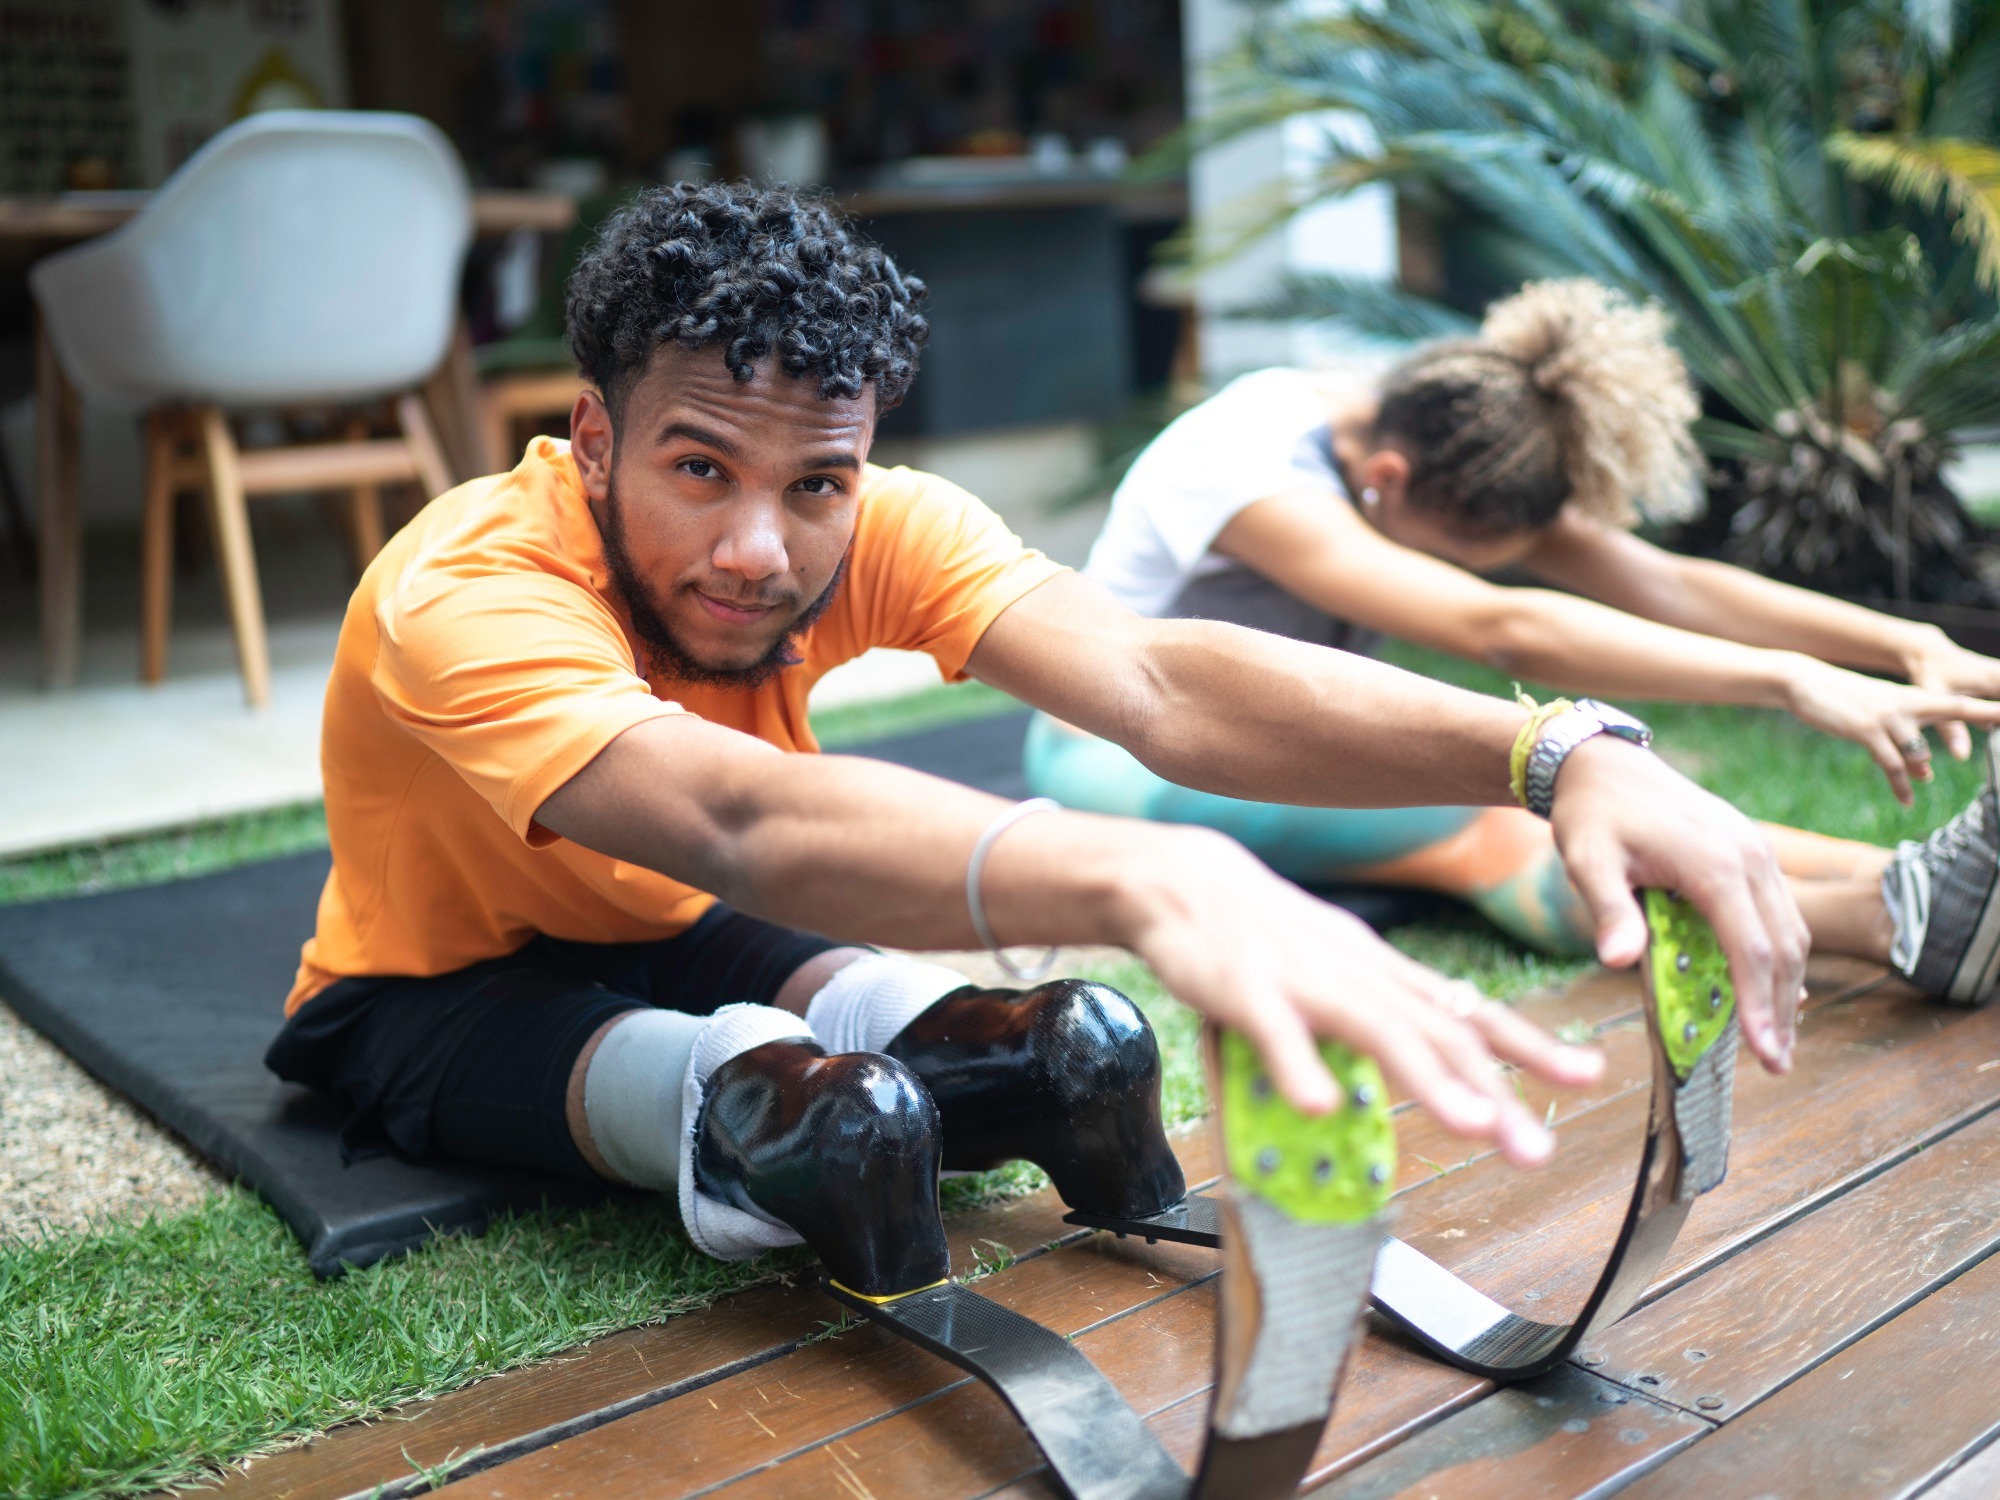 https://www.agedcareguide.com.au/assets/news/articles/portrait-of-young-man-with-prosthetic-leg-stretching-in-the-yard-picture-id1181317568.jpg